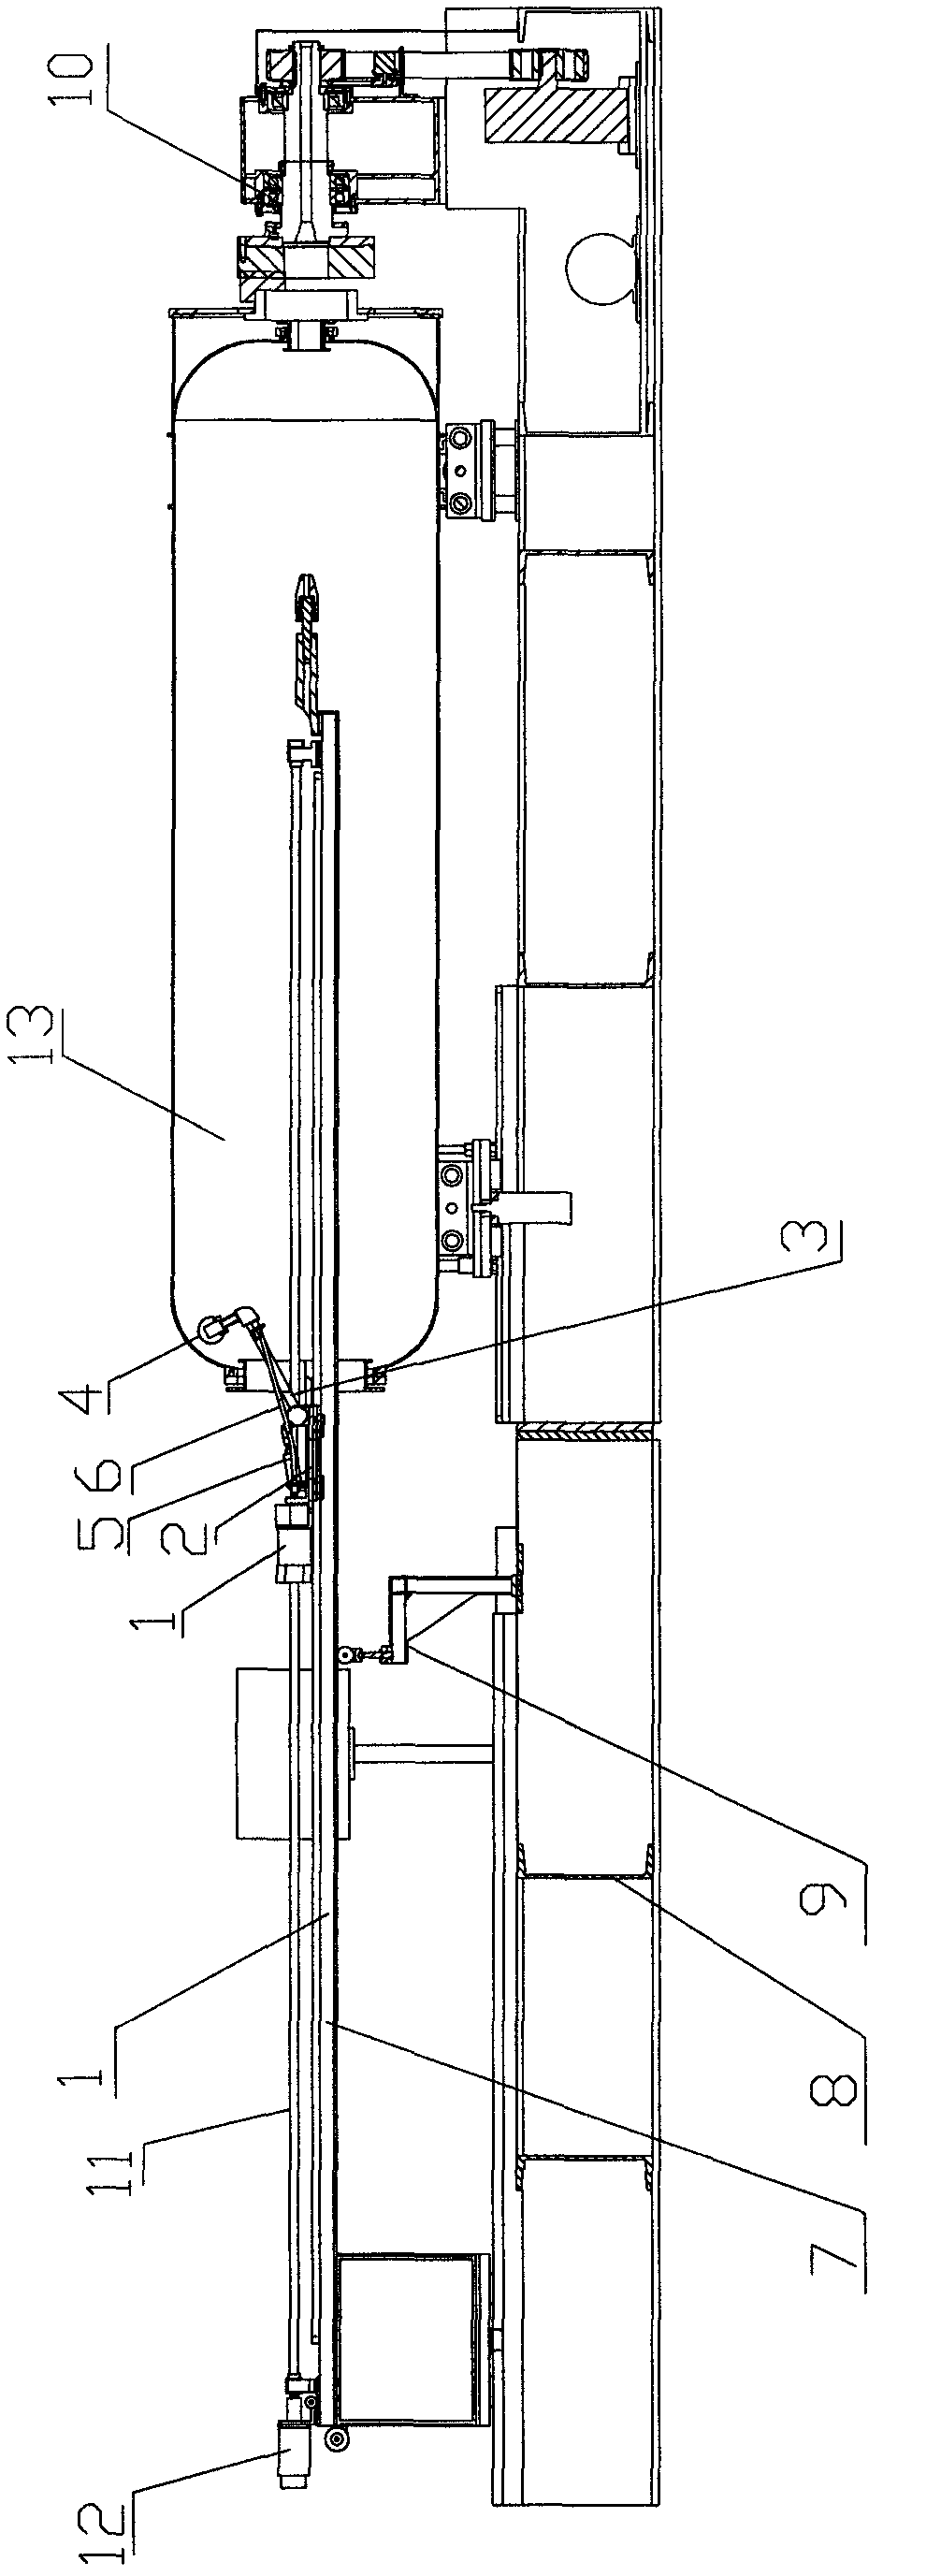 Processing device used for inner wall of barrel body